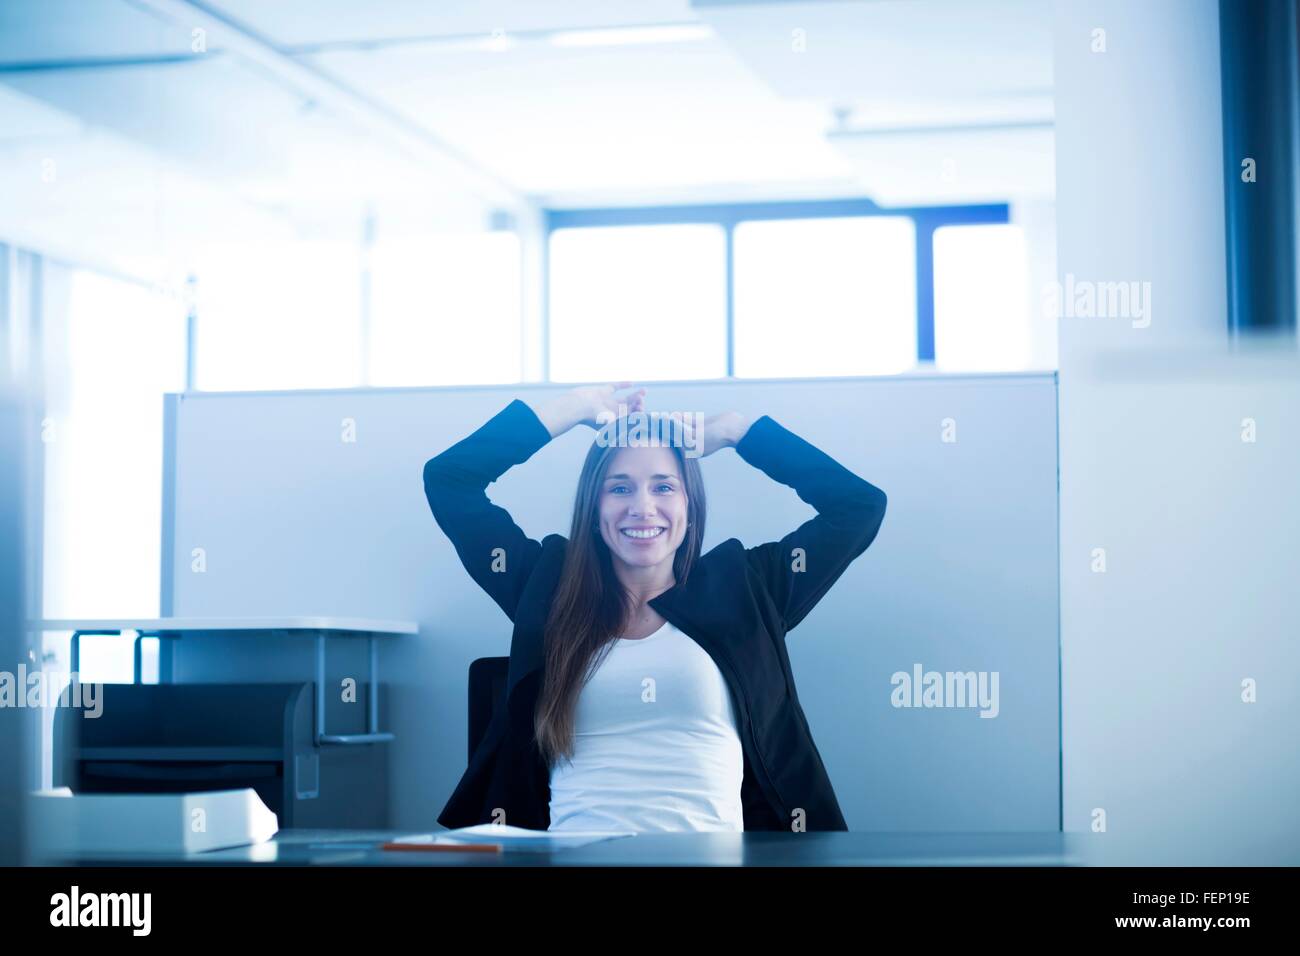 Young woman sitting at desk in office hands behind head looking at camera smiling Stock Photo